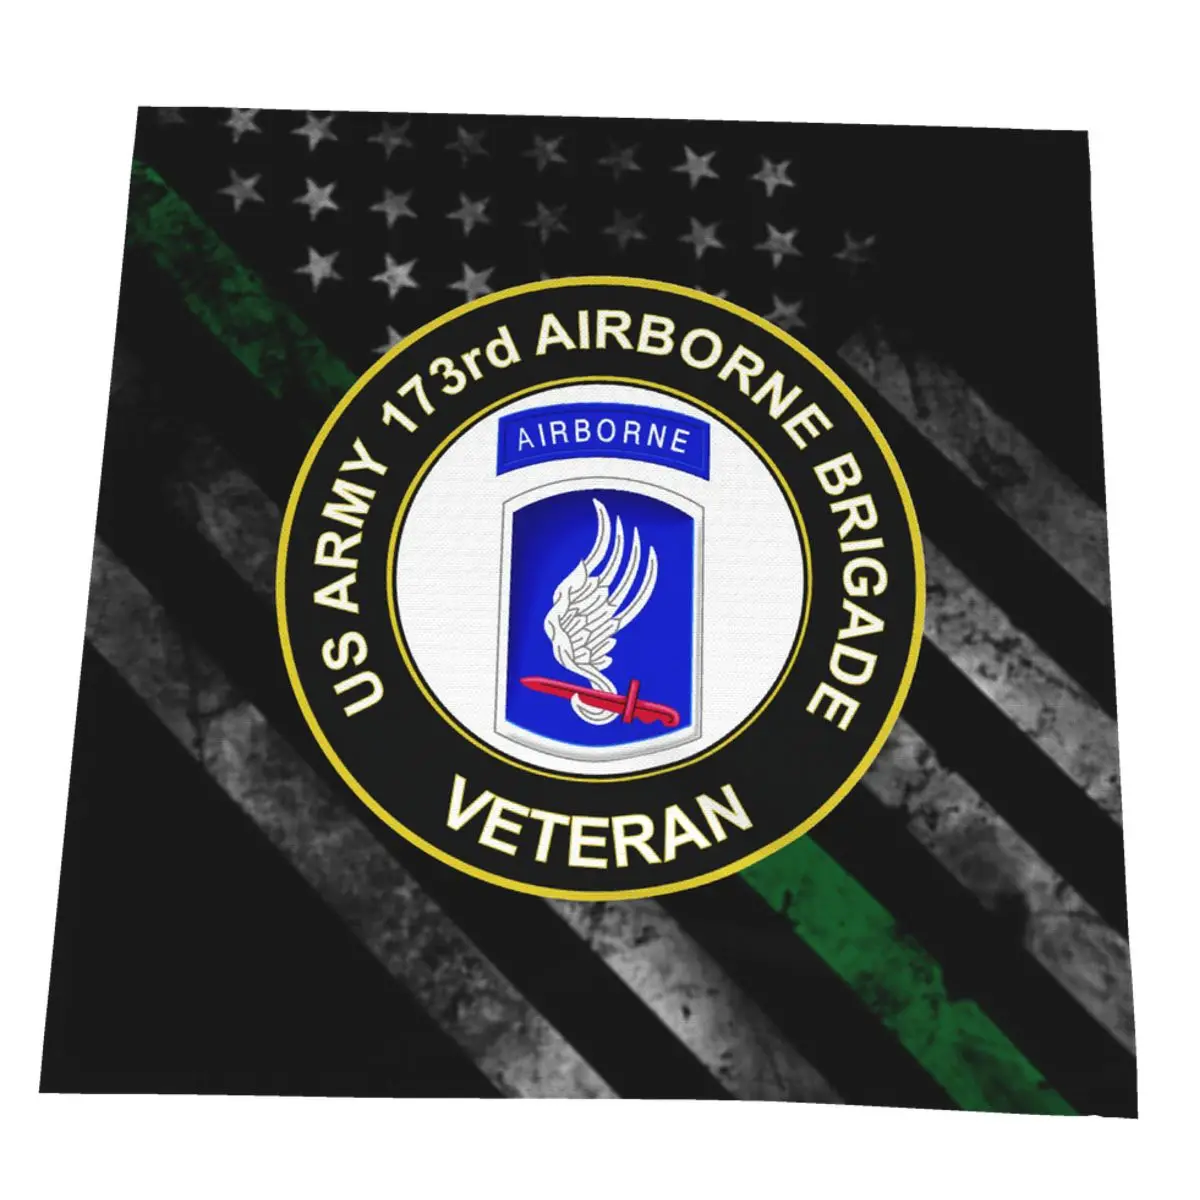 

US Army 173rd Airborne Brigade Veteran Napkin For Party Wedding Table Cloth Linen Cotton Available Restaurant Dinner 50x50cm